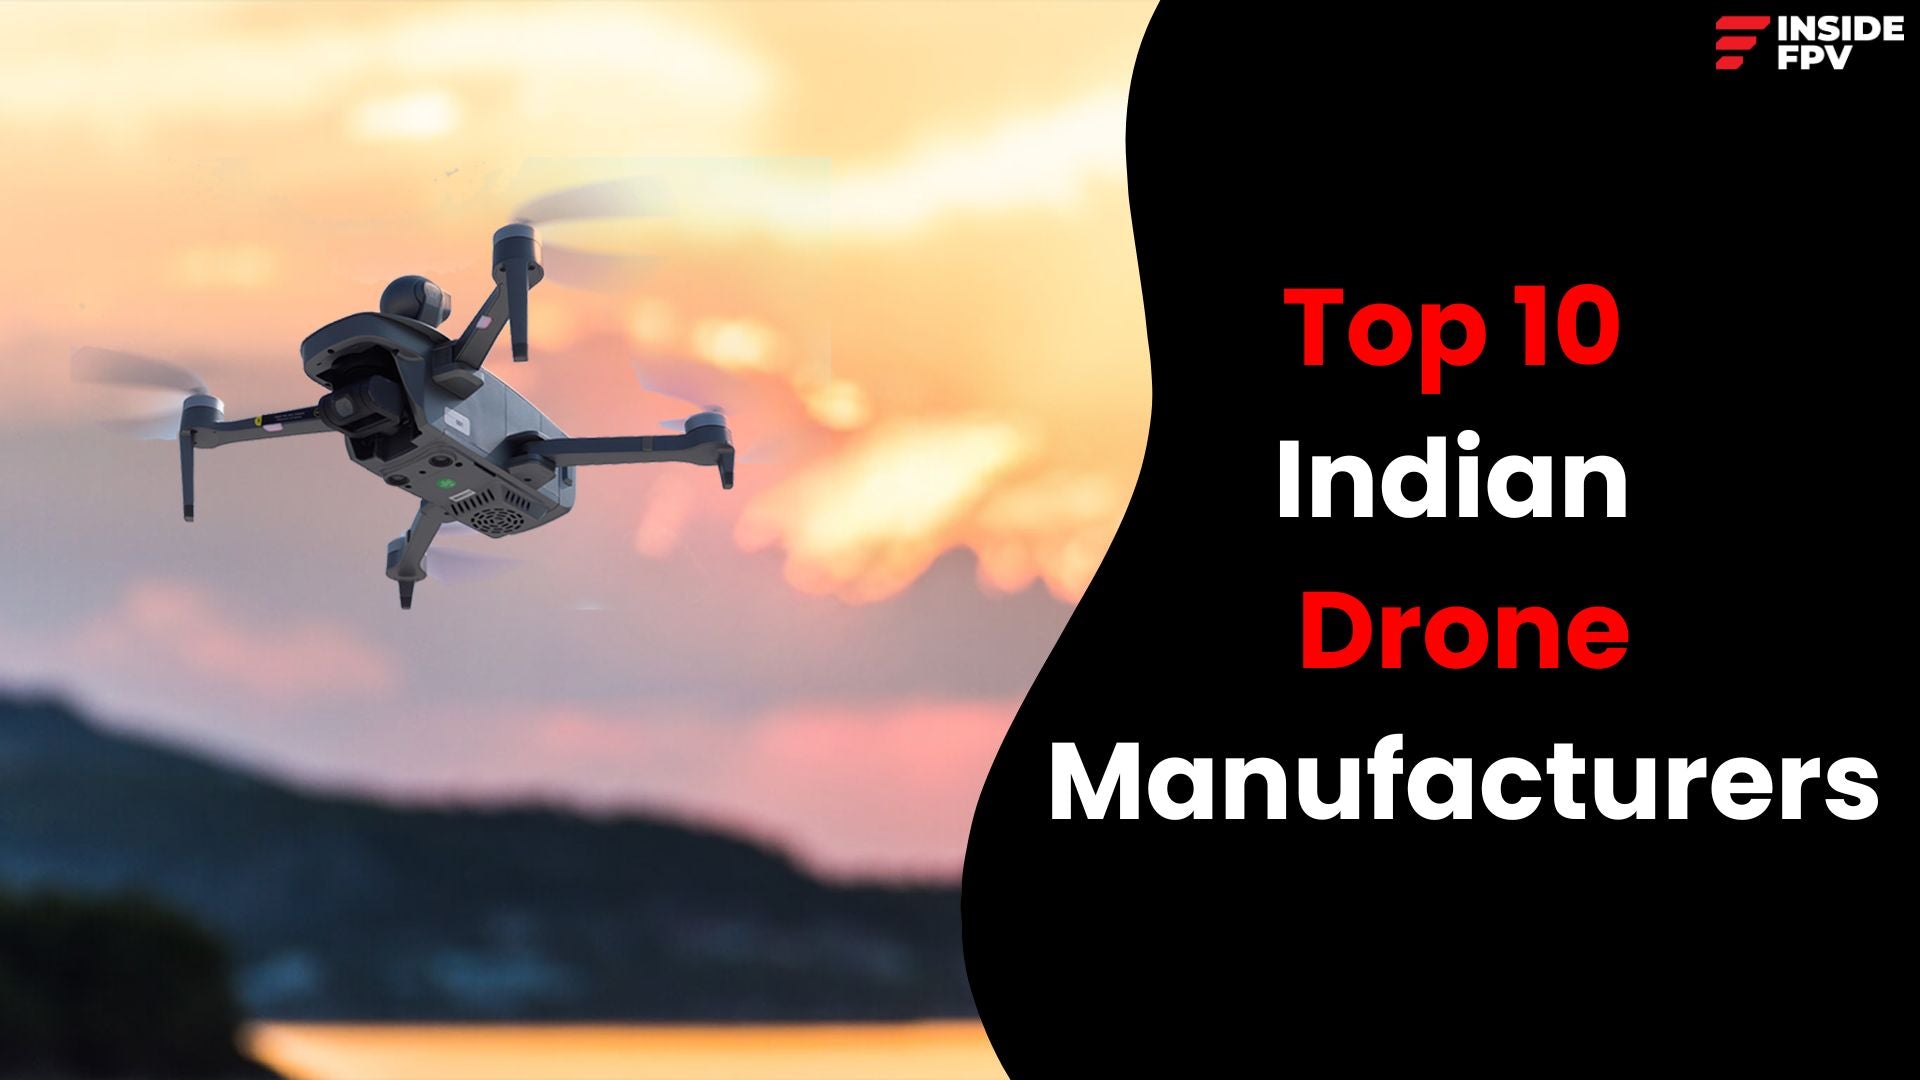 Top 10 Indian Drone Manufacturers